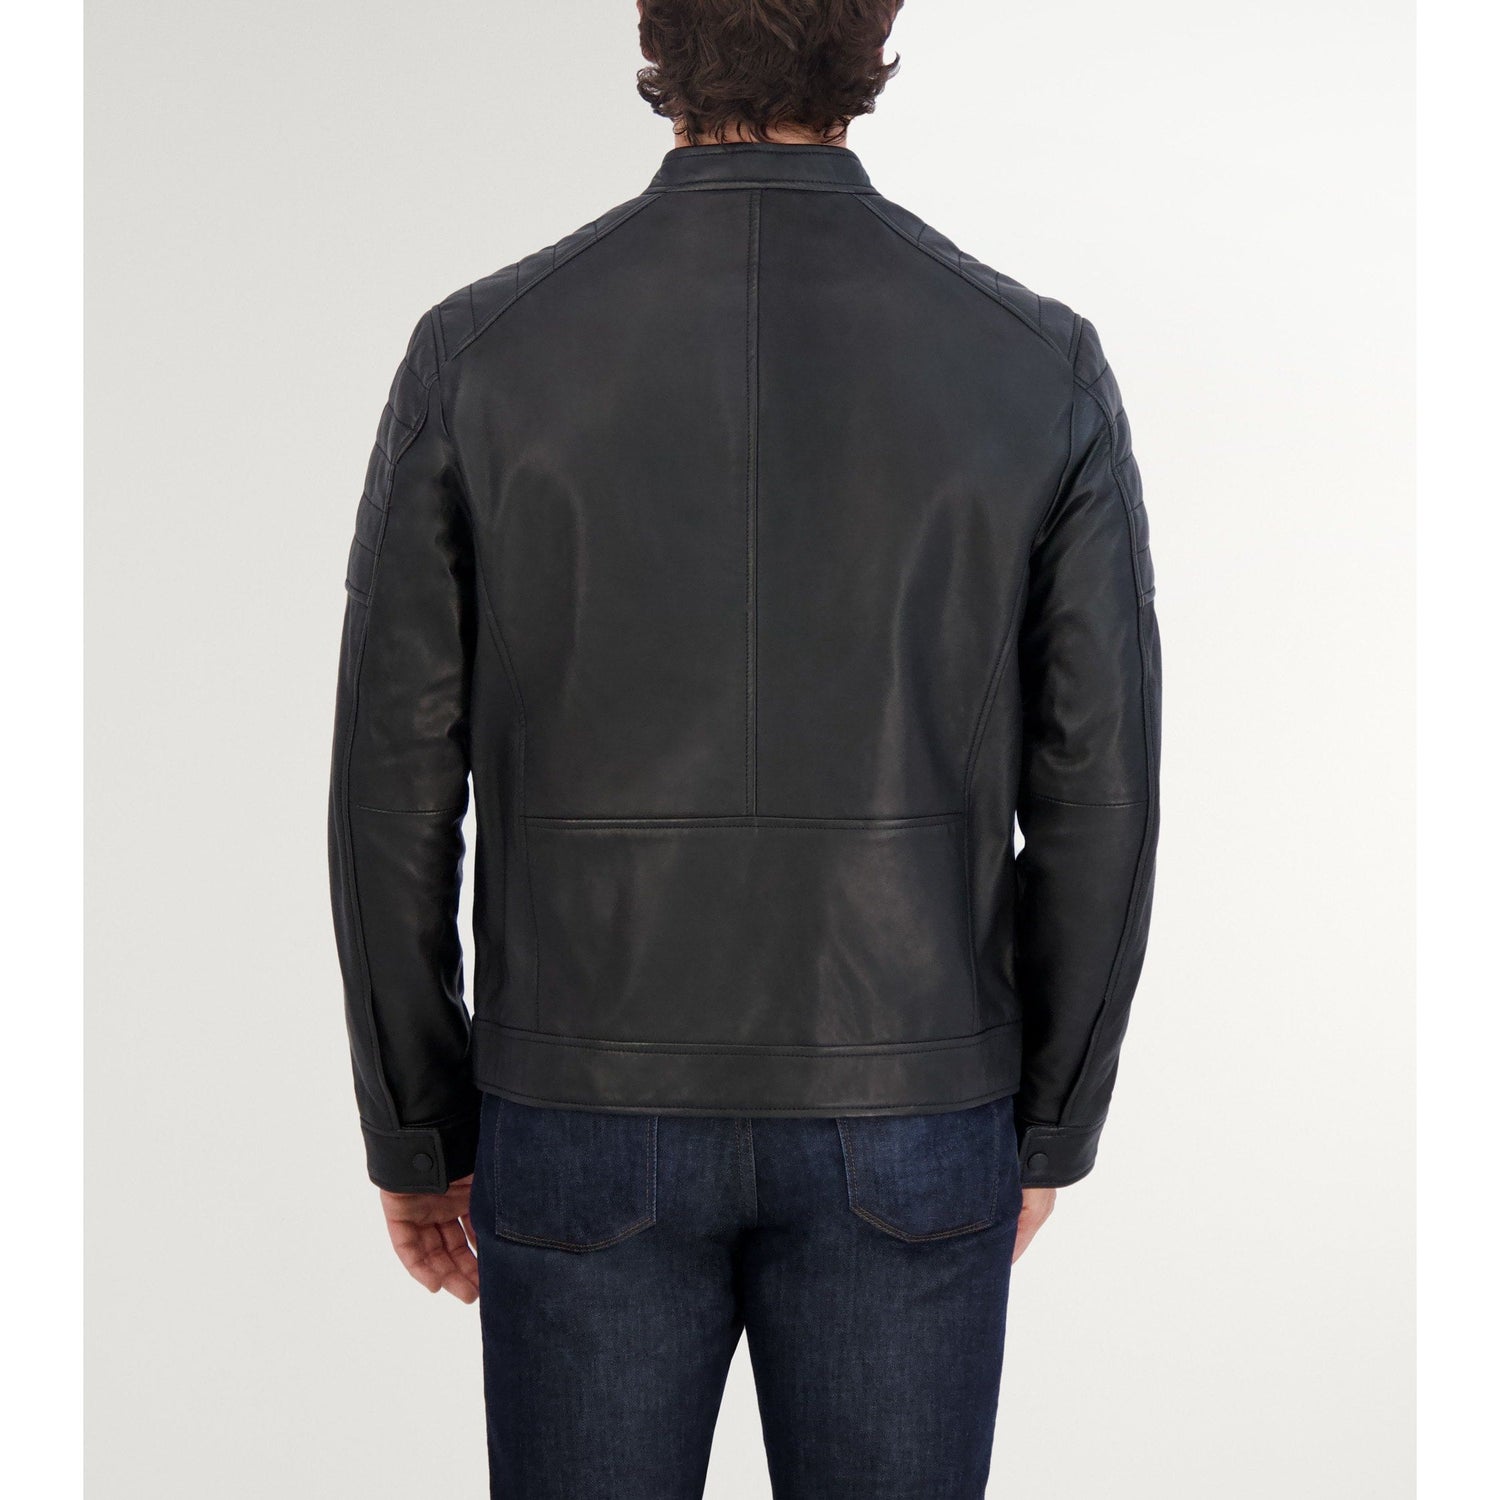 Cole Haan Men's Racer Lightweight Leather Jacket - Zooloo Leather